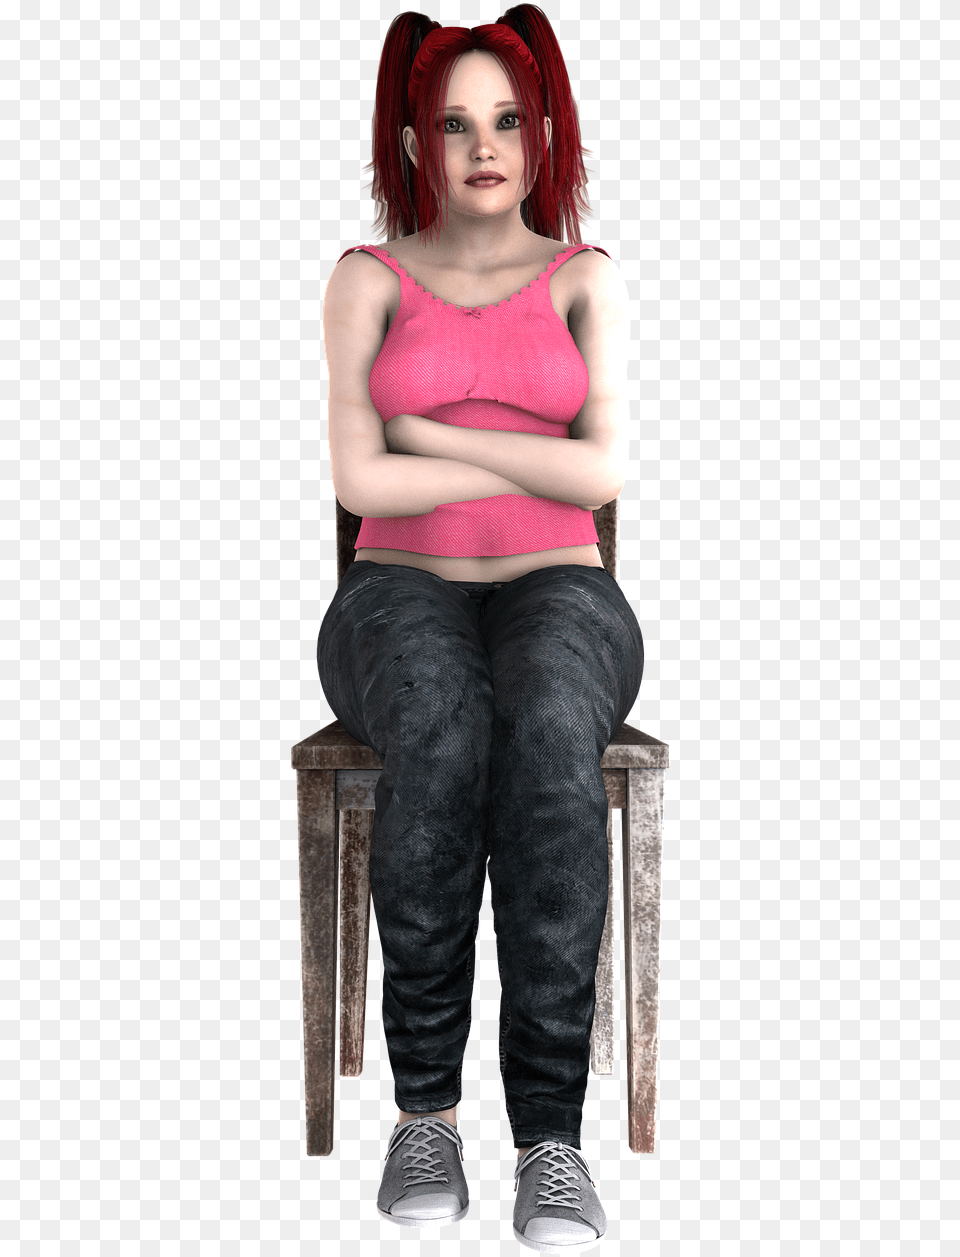 People Sitting, Shoe, Clothing, Pants, Jeans Png Image